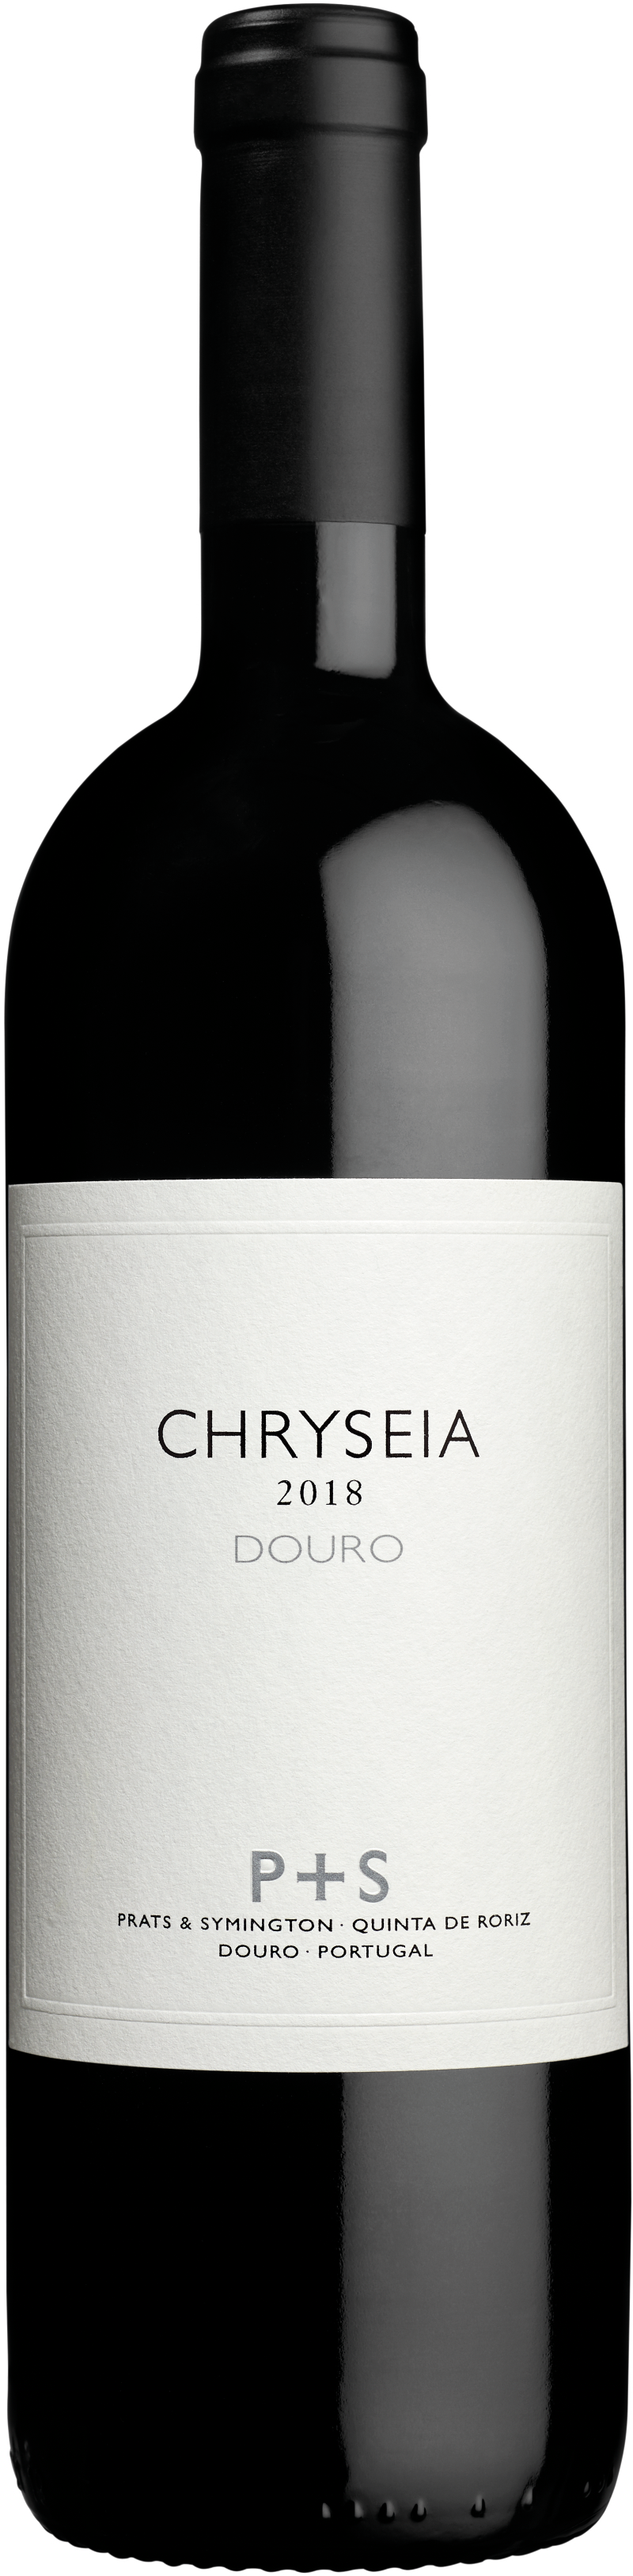 Product Image for P&S CHRYSEIA DOURO RED 2018